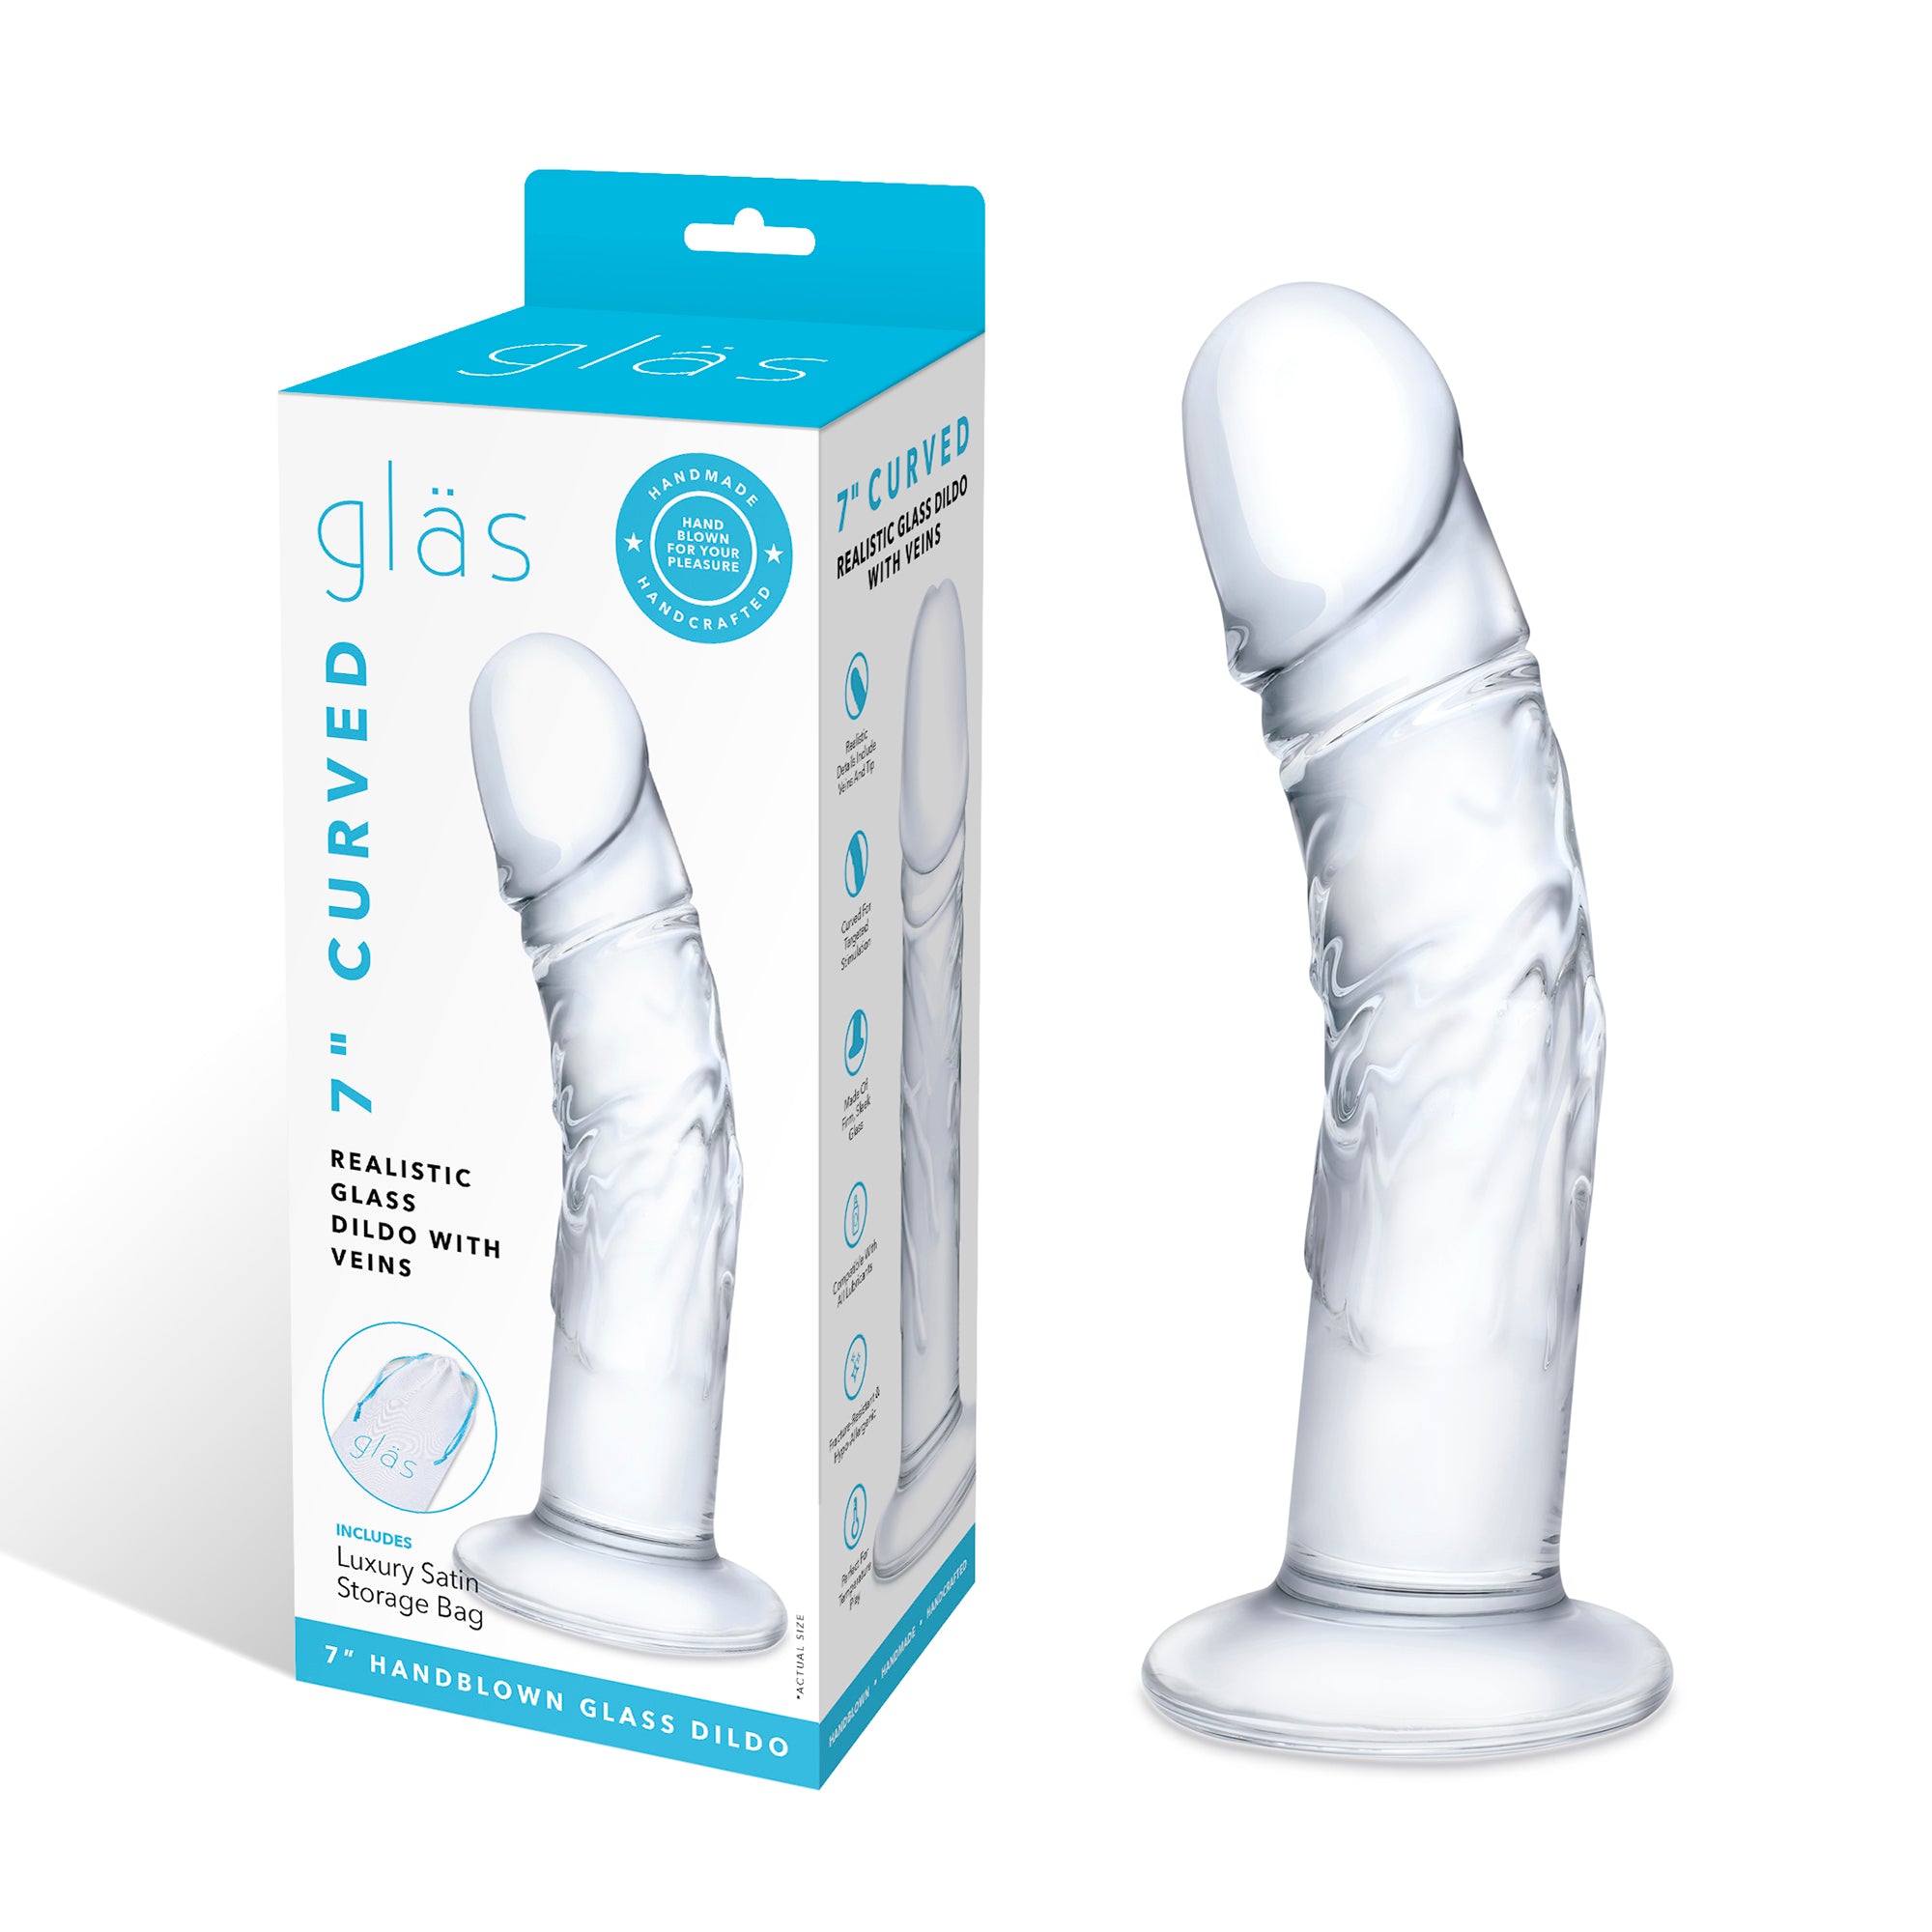 7" Curved Realistic Glass Dildo With Veins